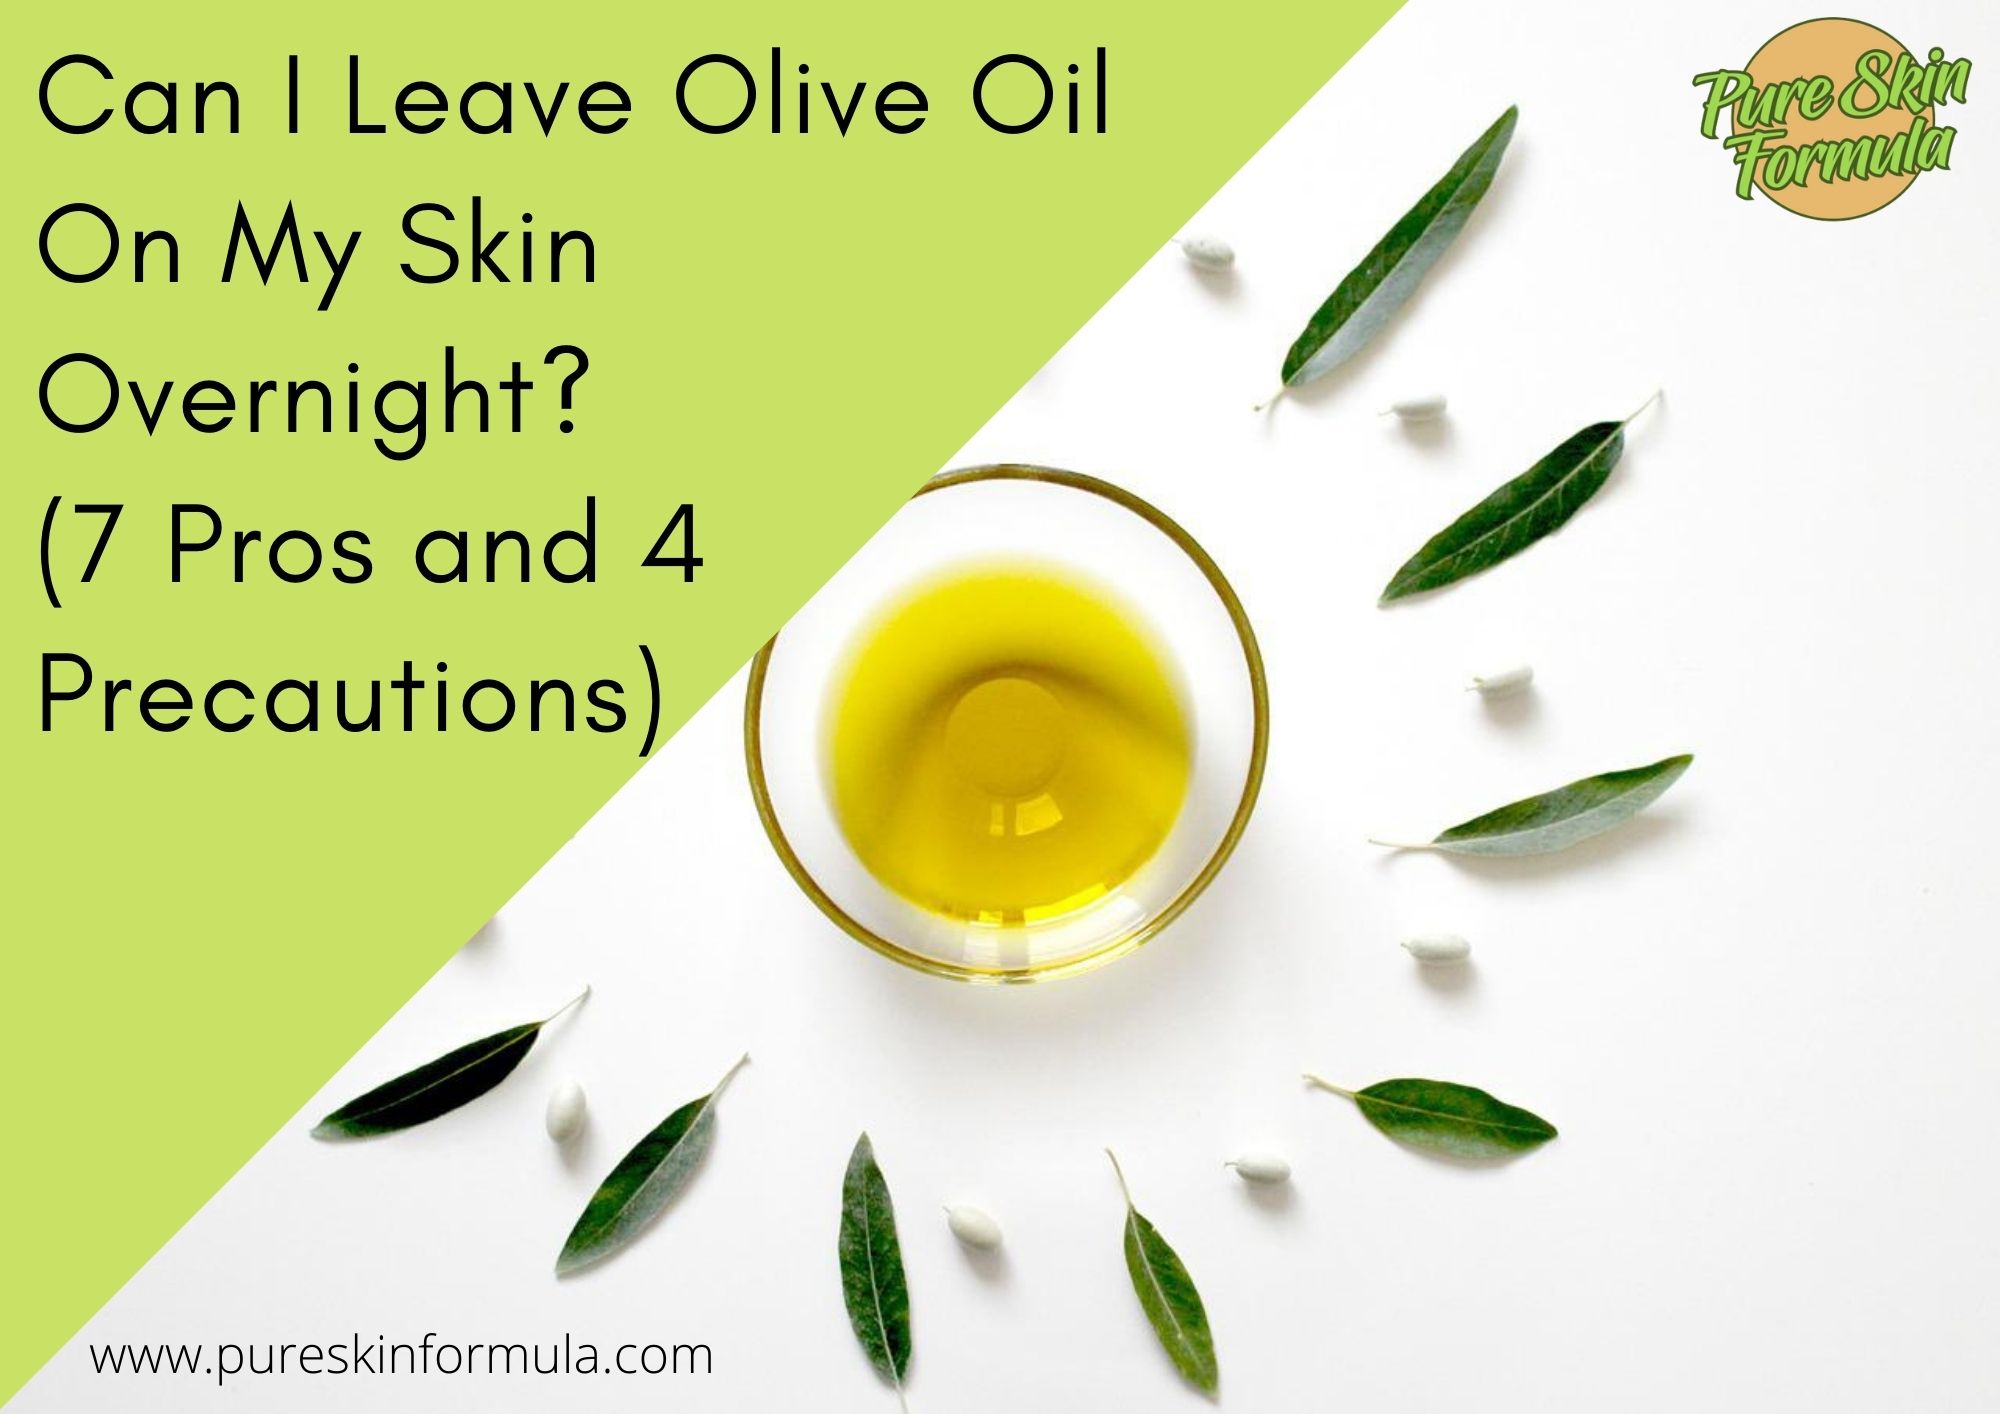 Can I Leave Olive Oil On My Skin Overnight